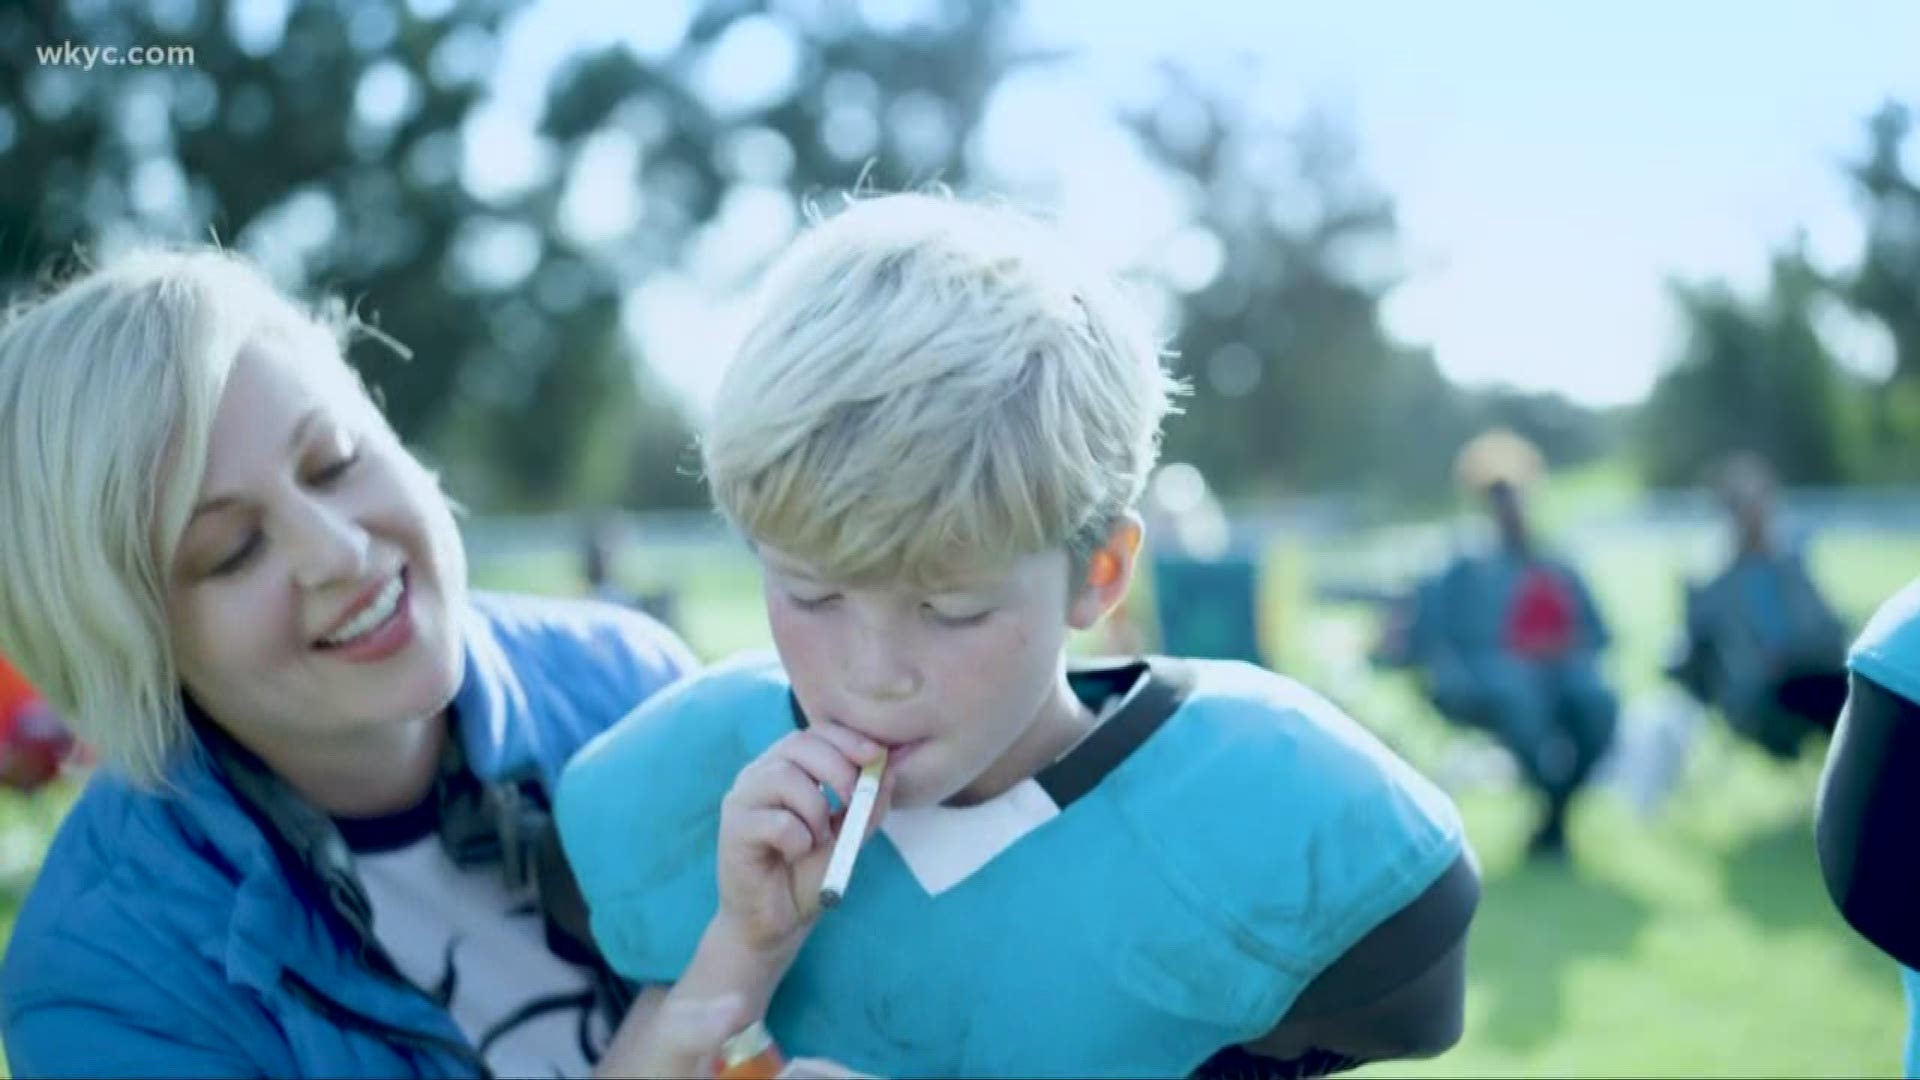 The PSA released by Concussion Legacy Foundation equates kids playing youth tackle football with letting them light up.